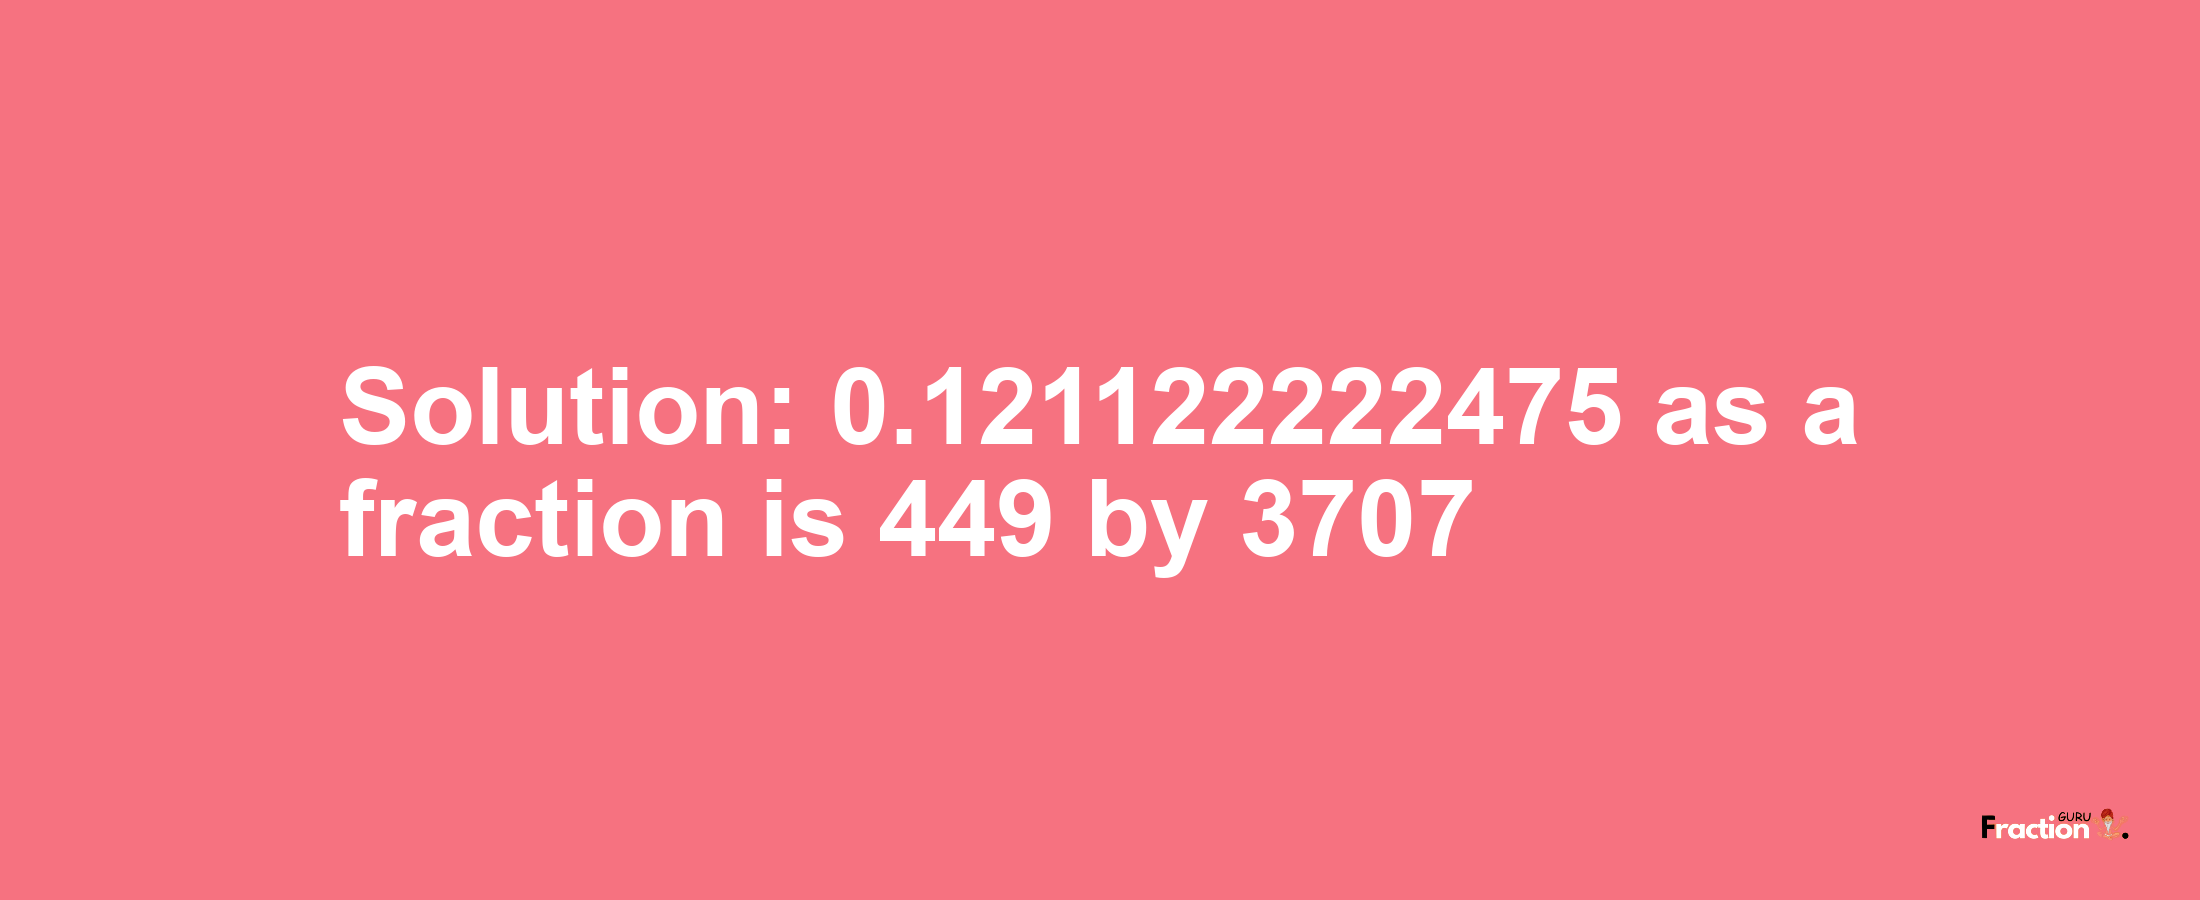 Solution:0.121122222475 as a fraction is 449/3707